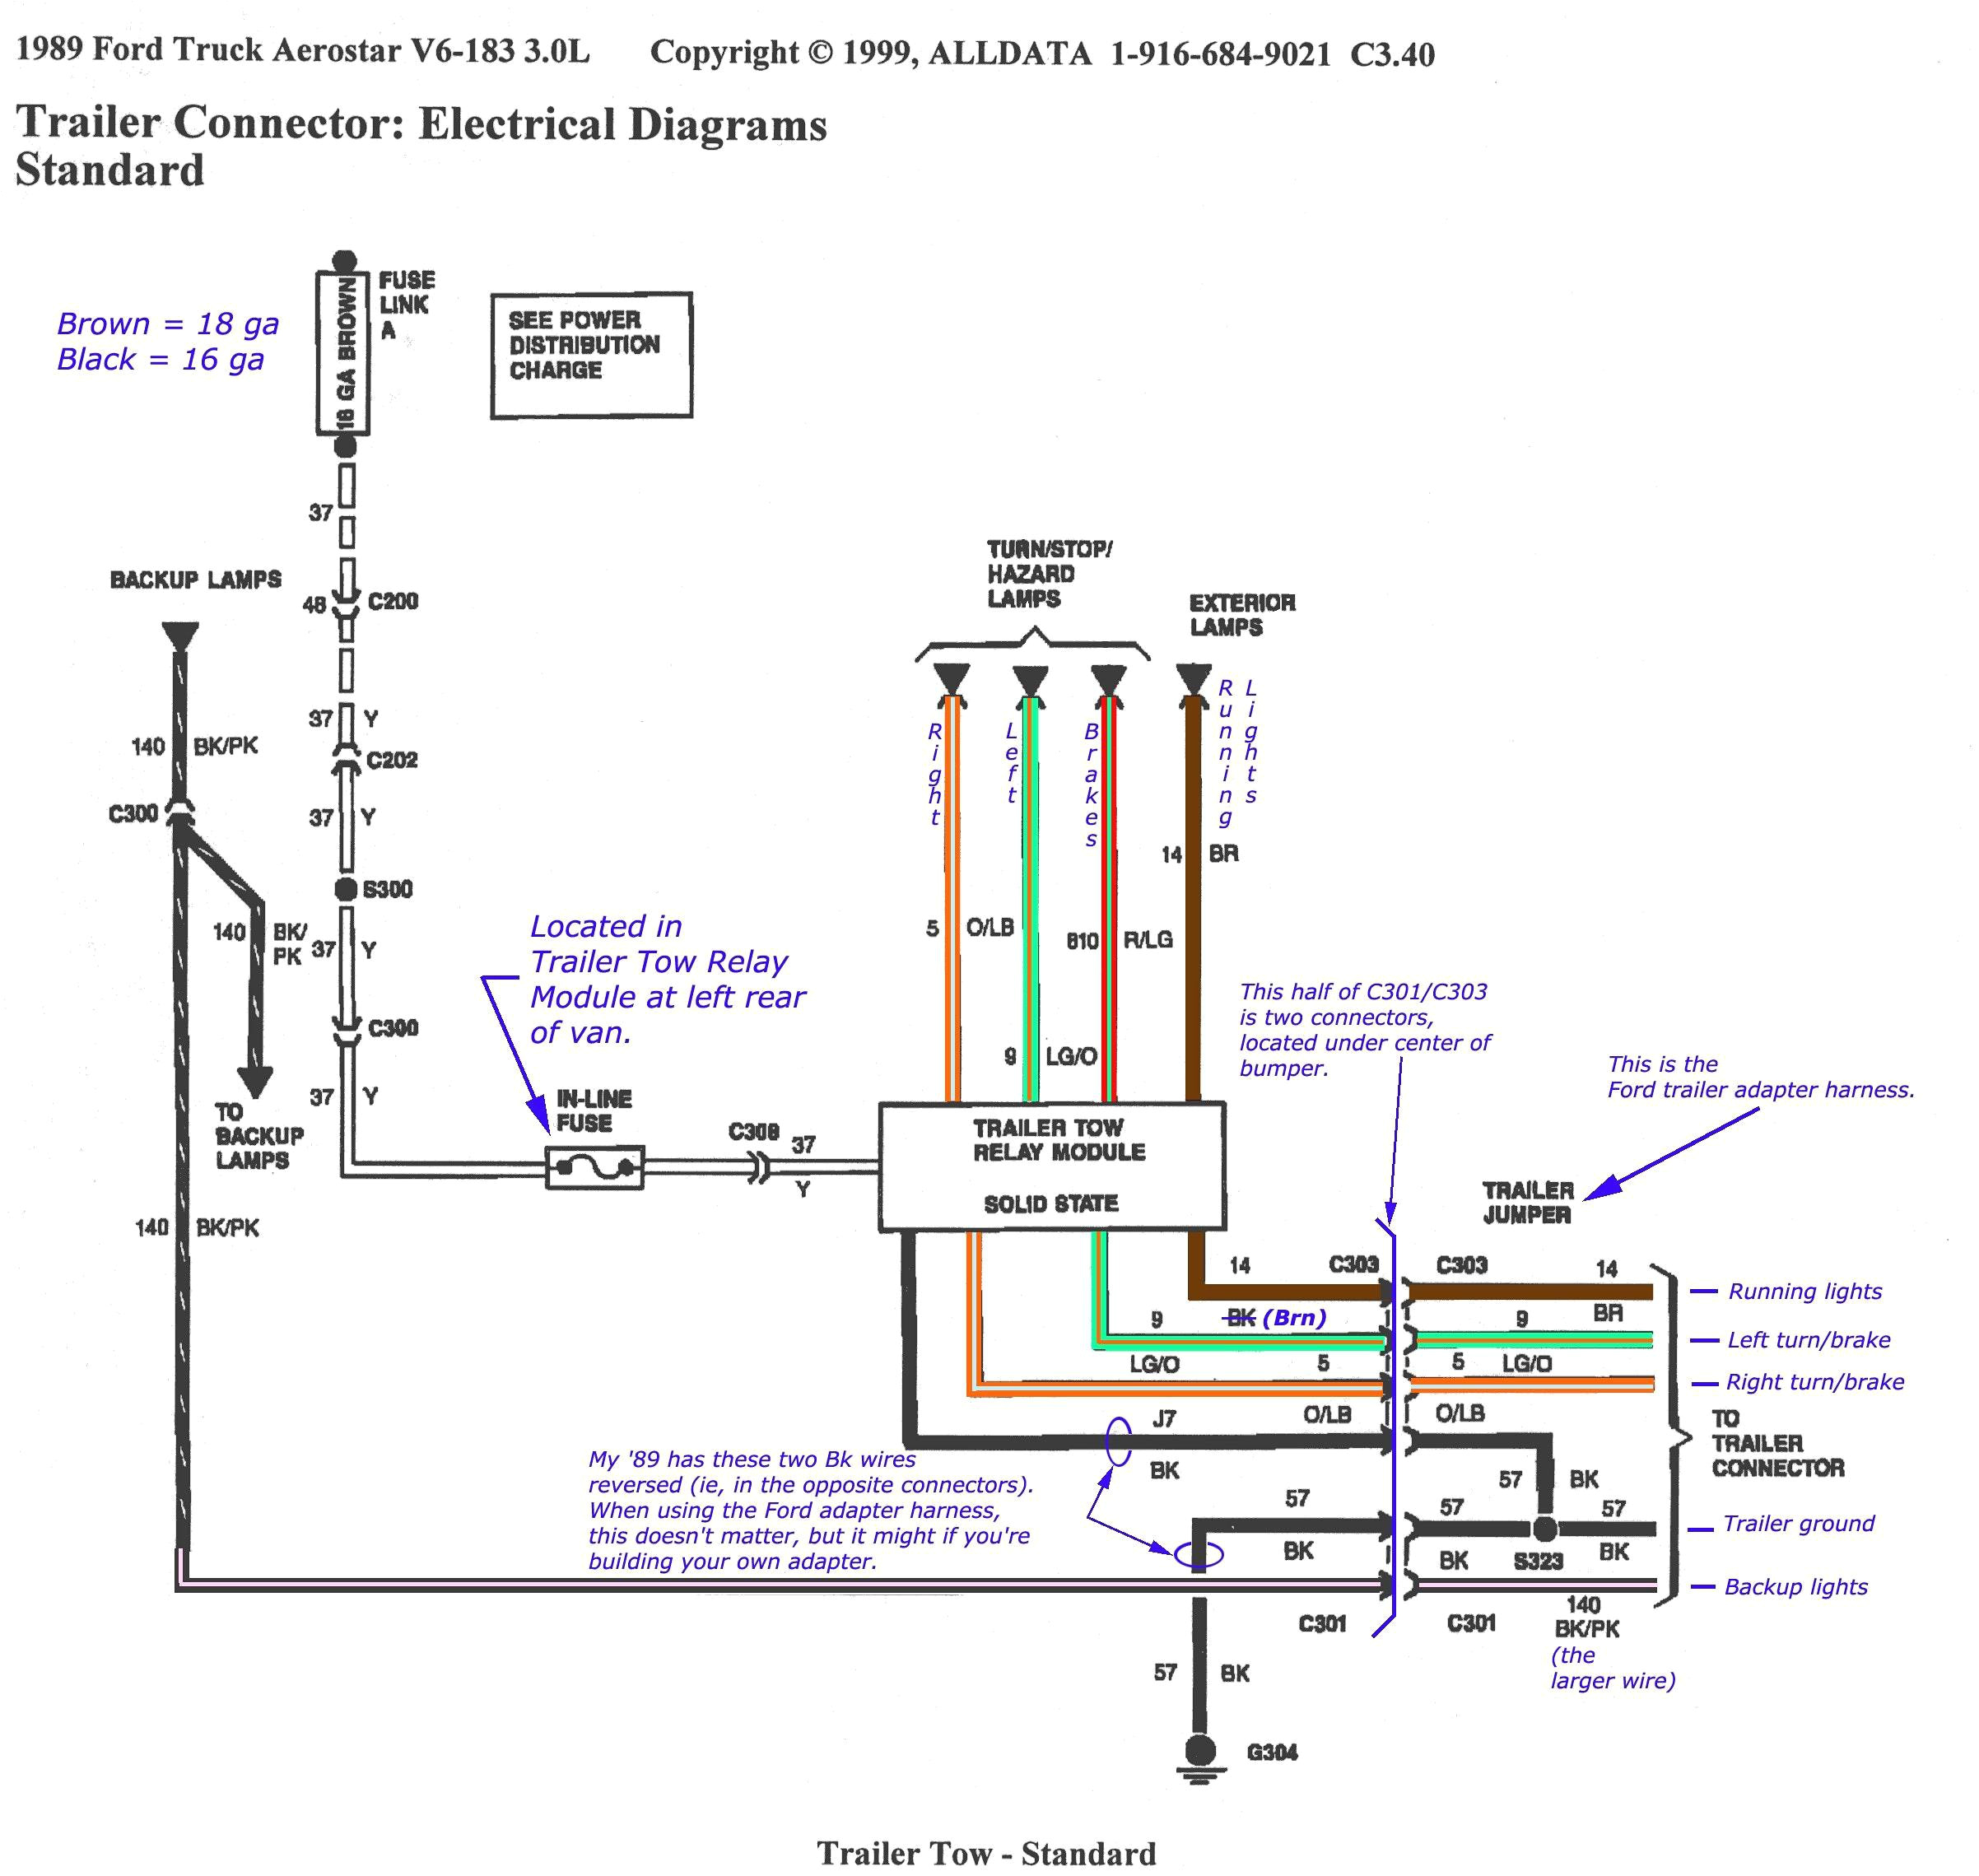 2009 ford f550 wiring diagrams wiring diagram img 2009 ford f550 wiring diagram 2009 ford f550 wiring diagram